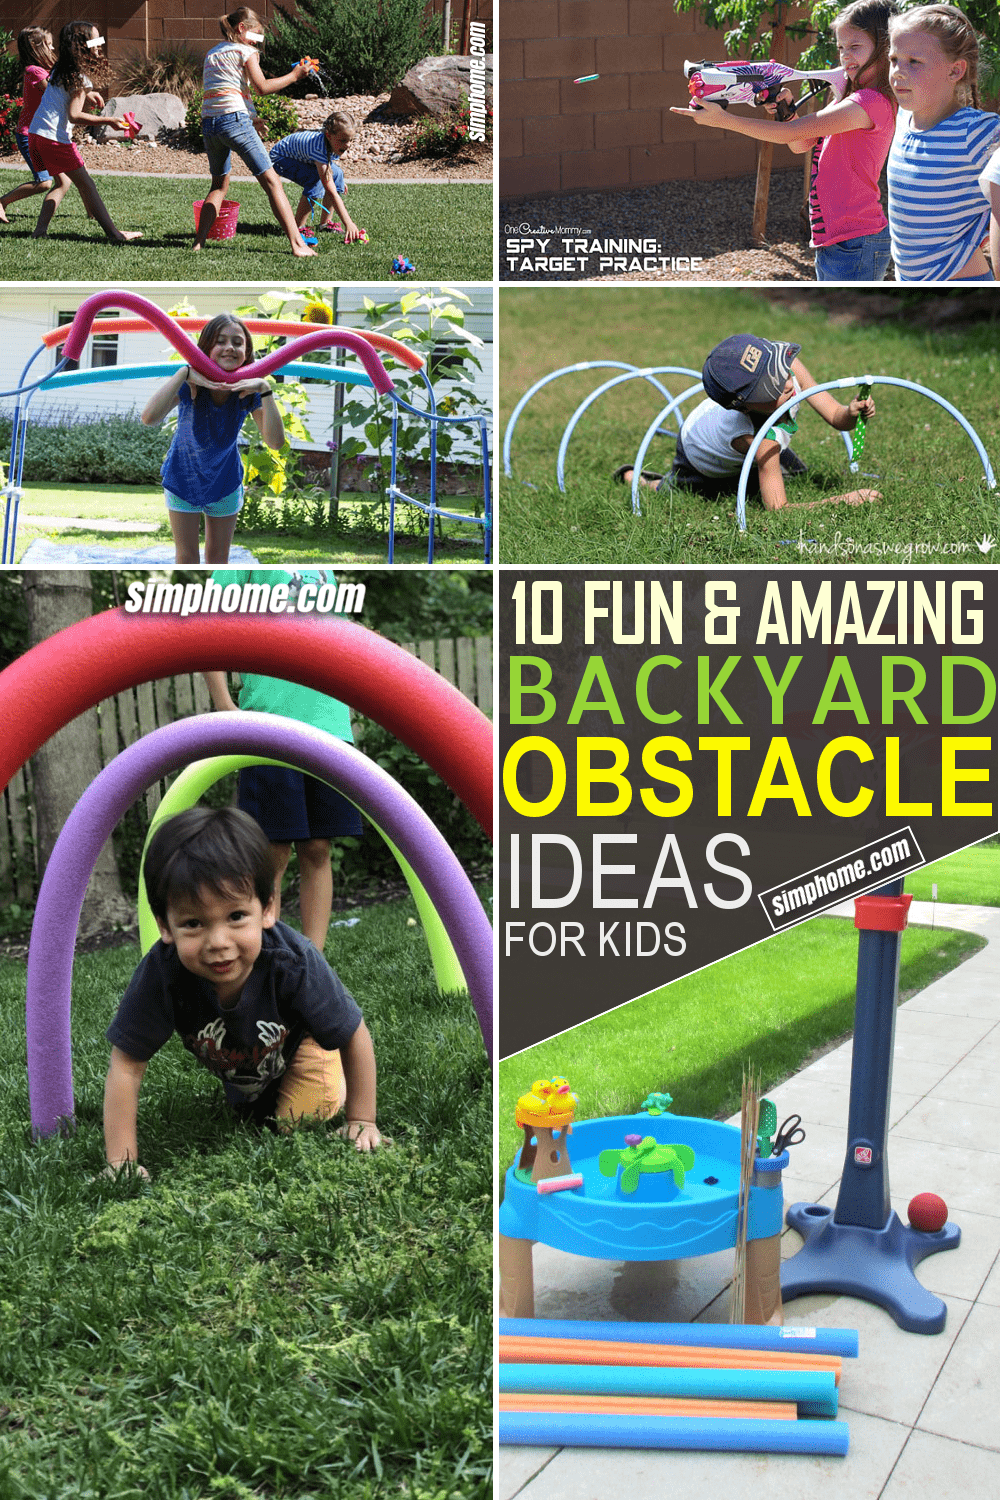 Backyard Obstacle Idea for Kid Ideas by Simphome.com Featured Image